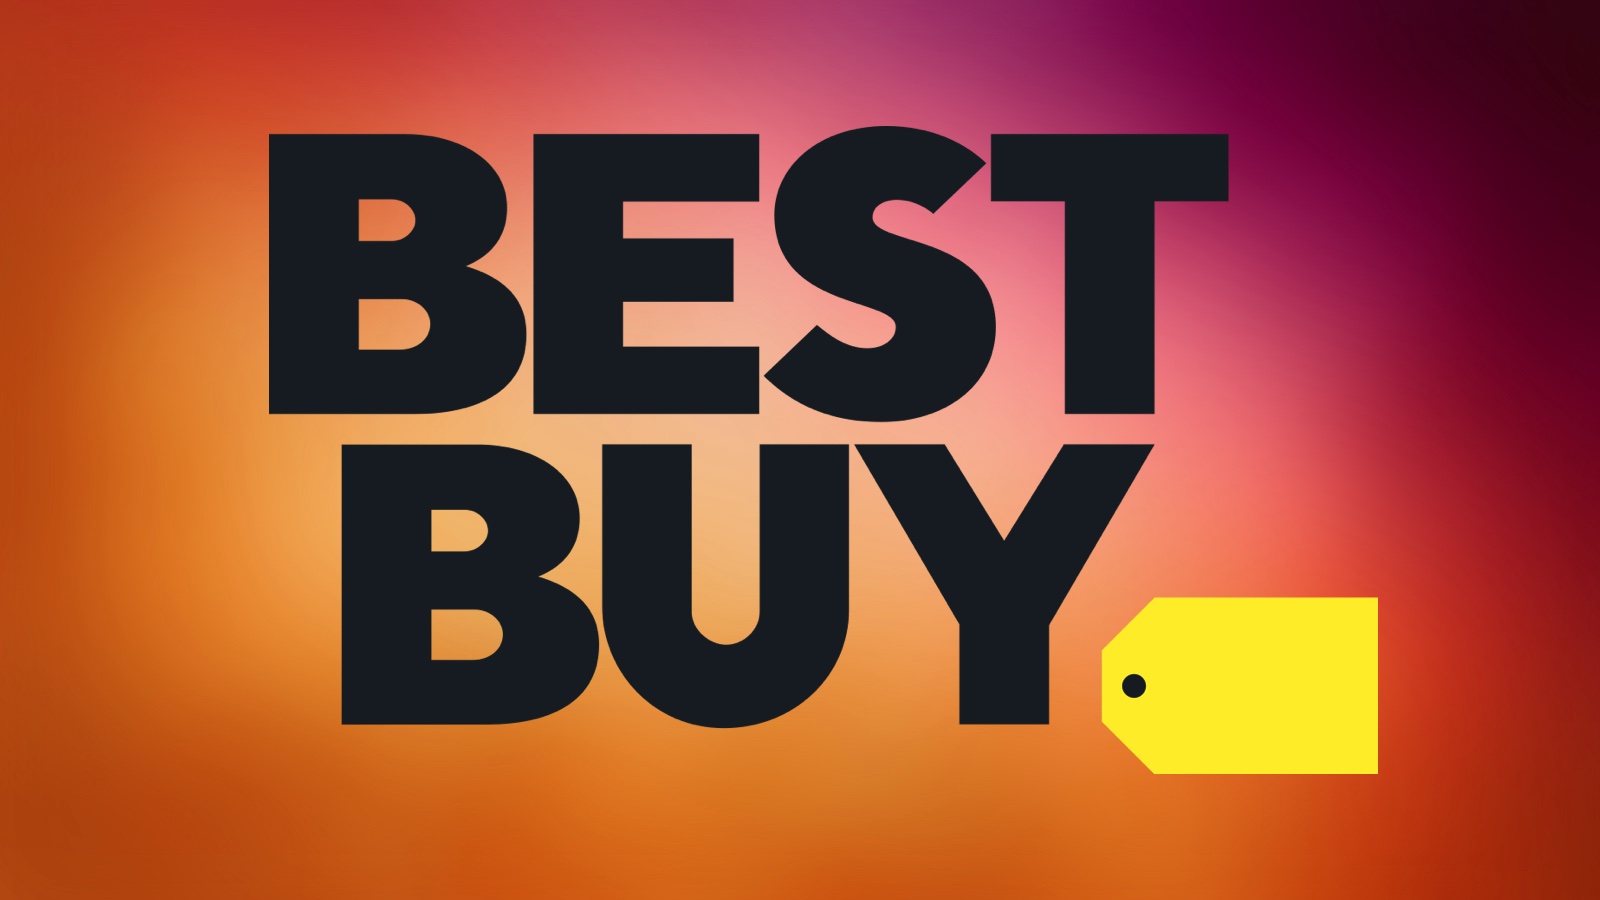 Get Record Low Prices on MacBooks, iPads, and More During Best Buy’s